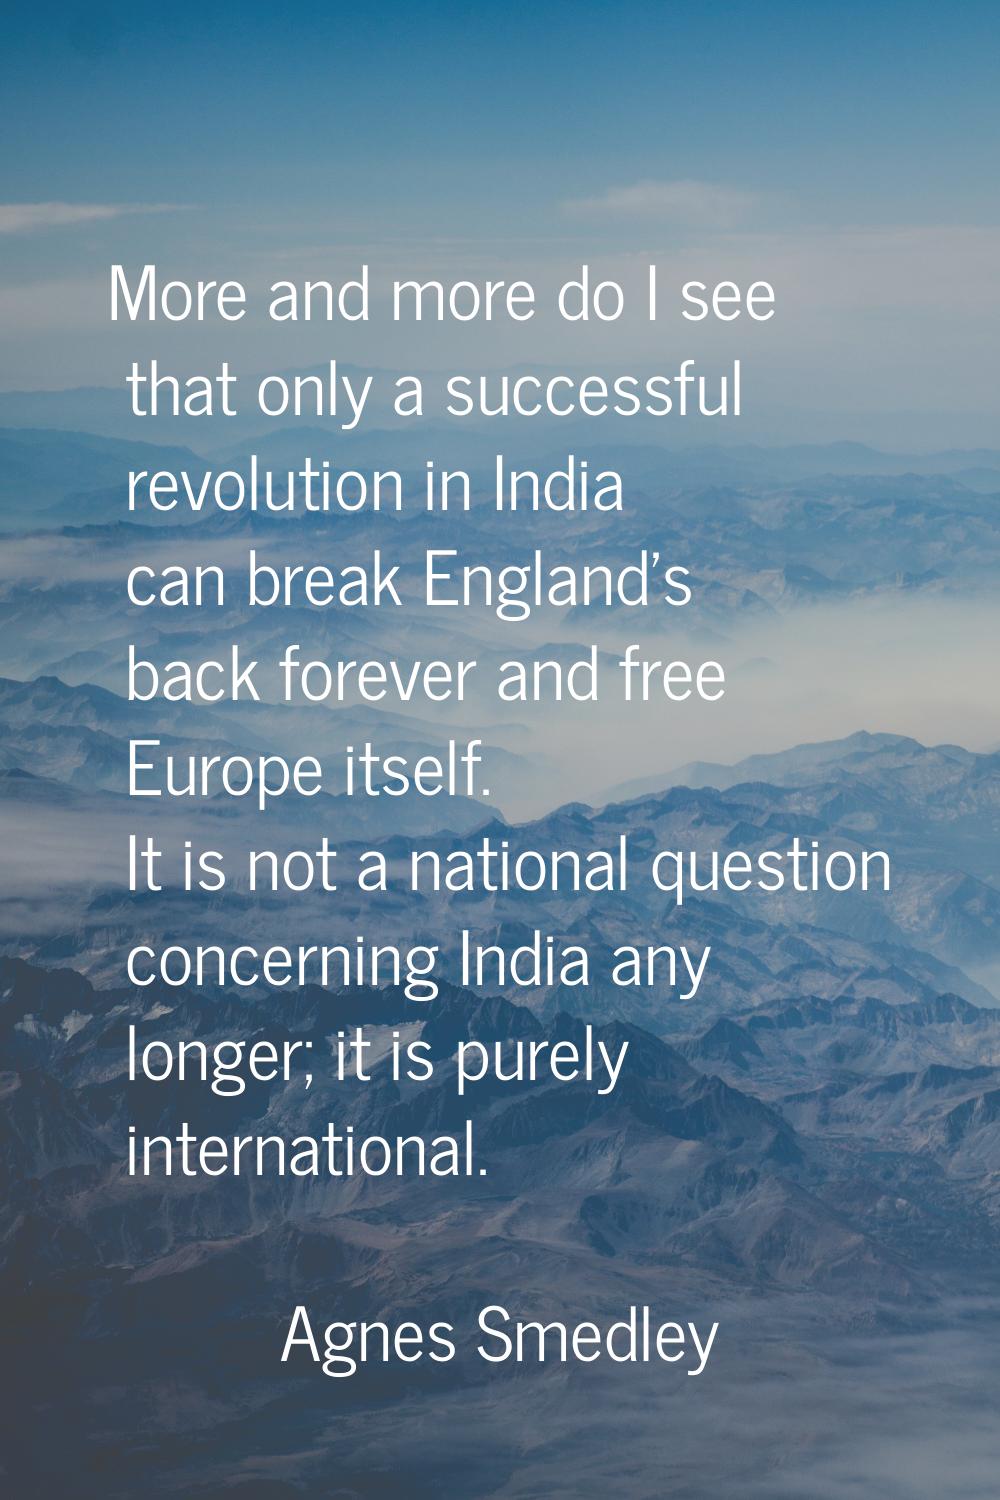 More and more do I see that only a successful revolution in India can break England's back forever 